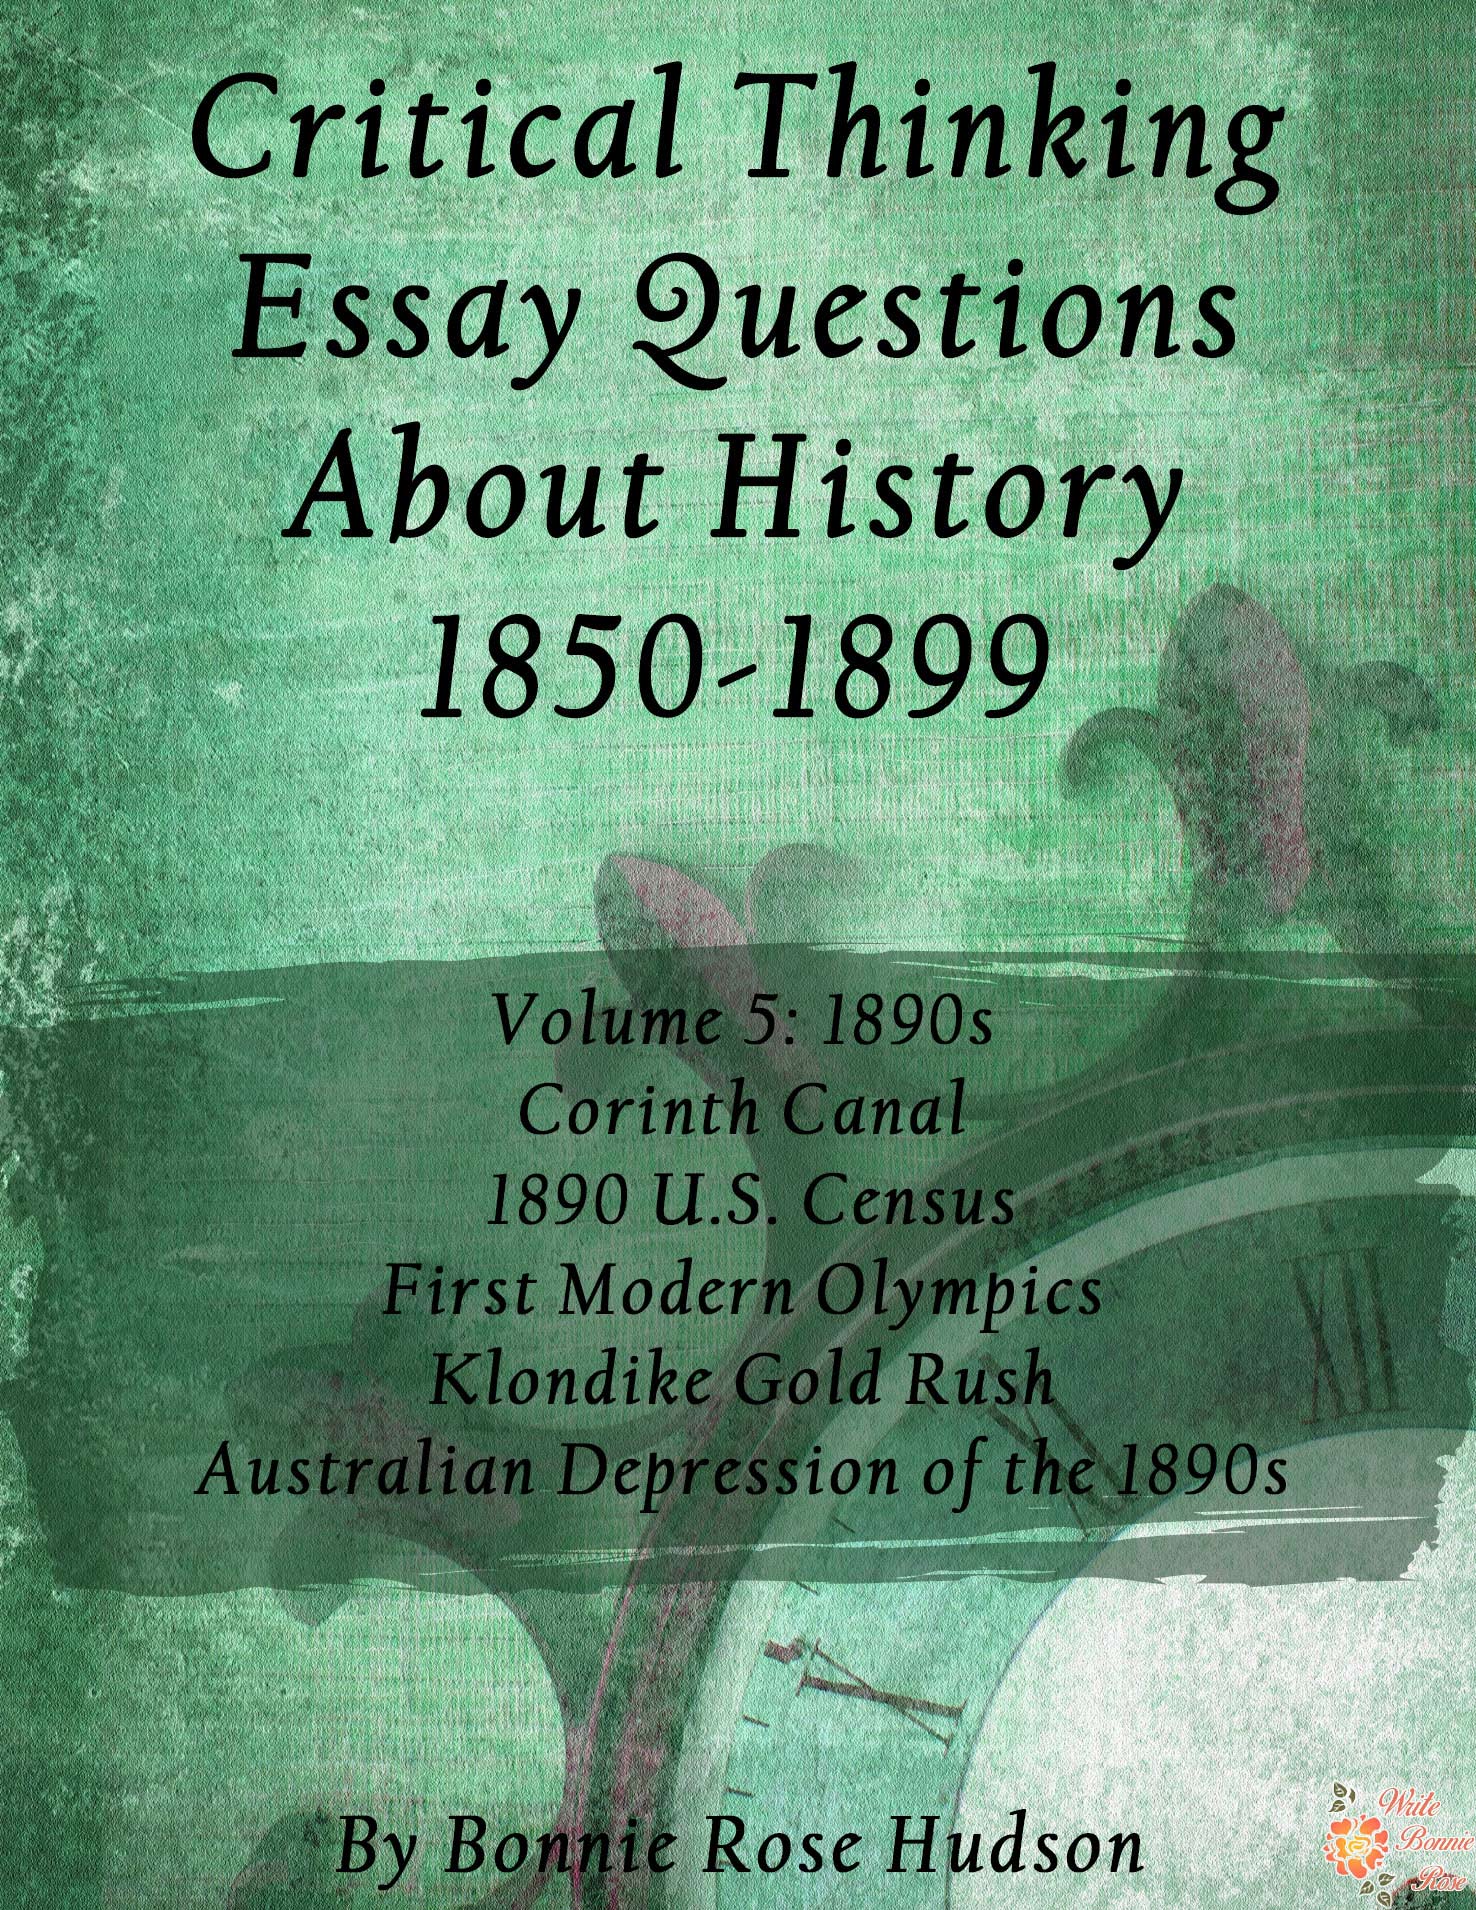 FREE Critical Thinking Essay Questions About History 1850-1899, Volume 5